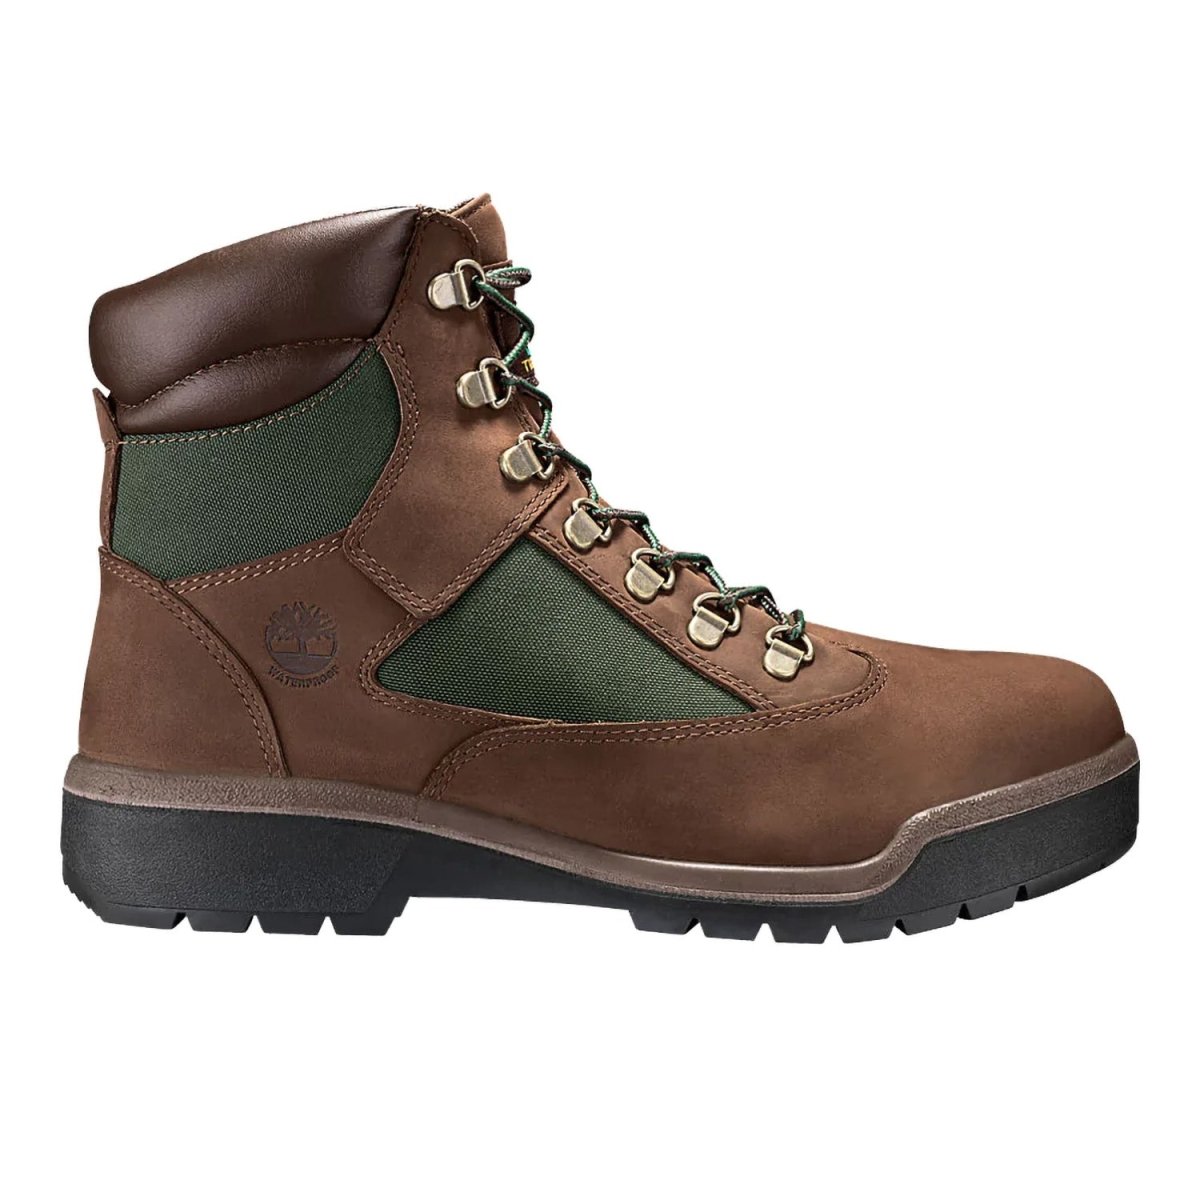 Timberland Men's 6" Field Boot "Beef and Broccoli" Brown/Green Waterproof - Tip Top Shoes of New